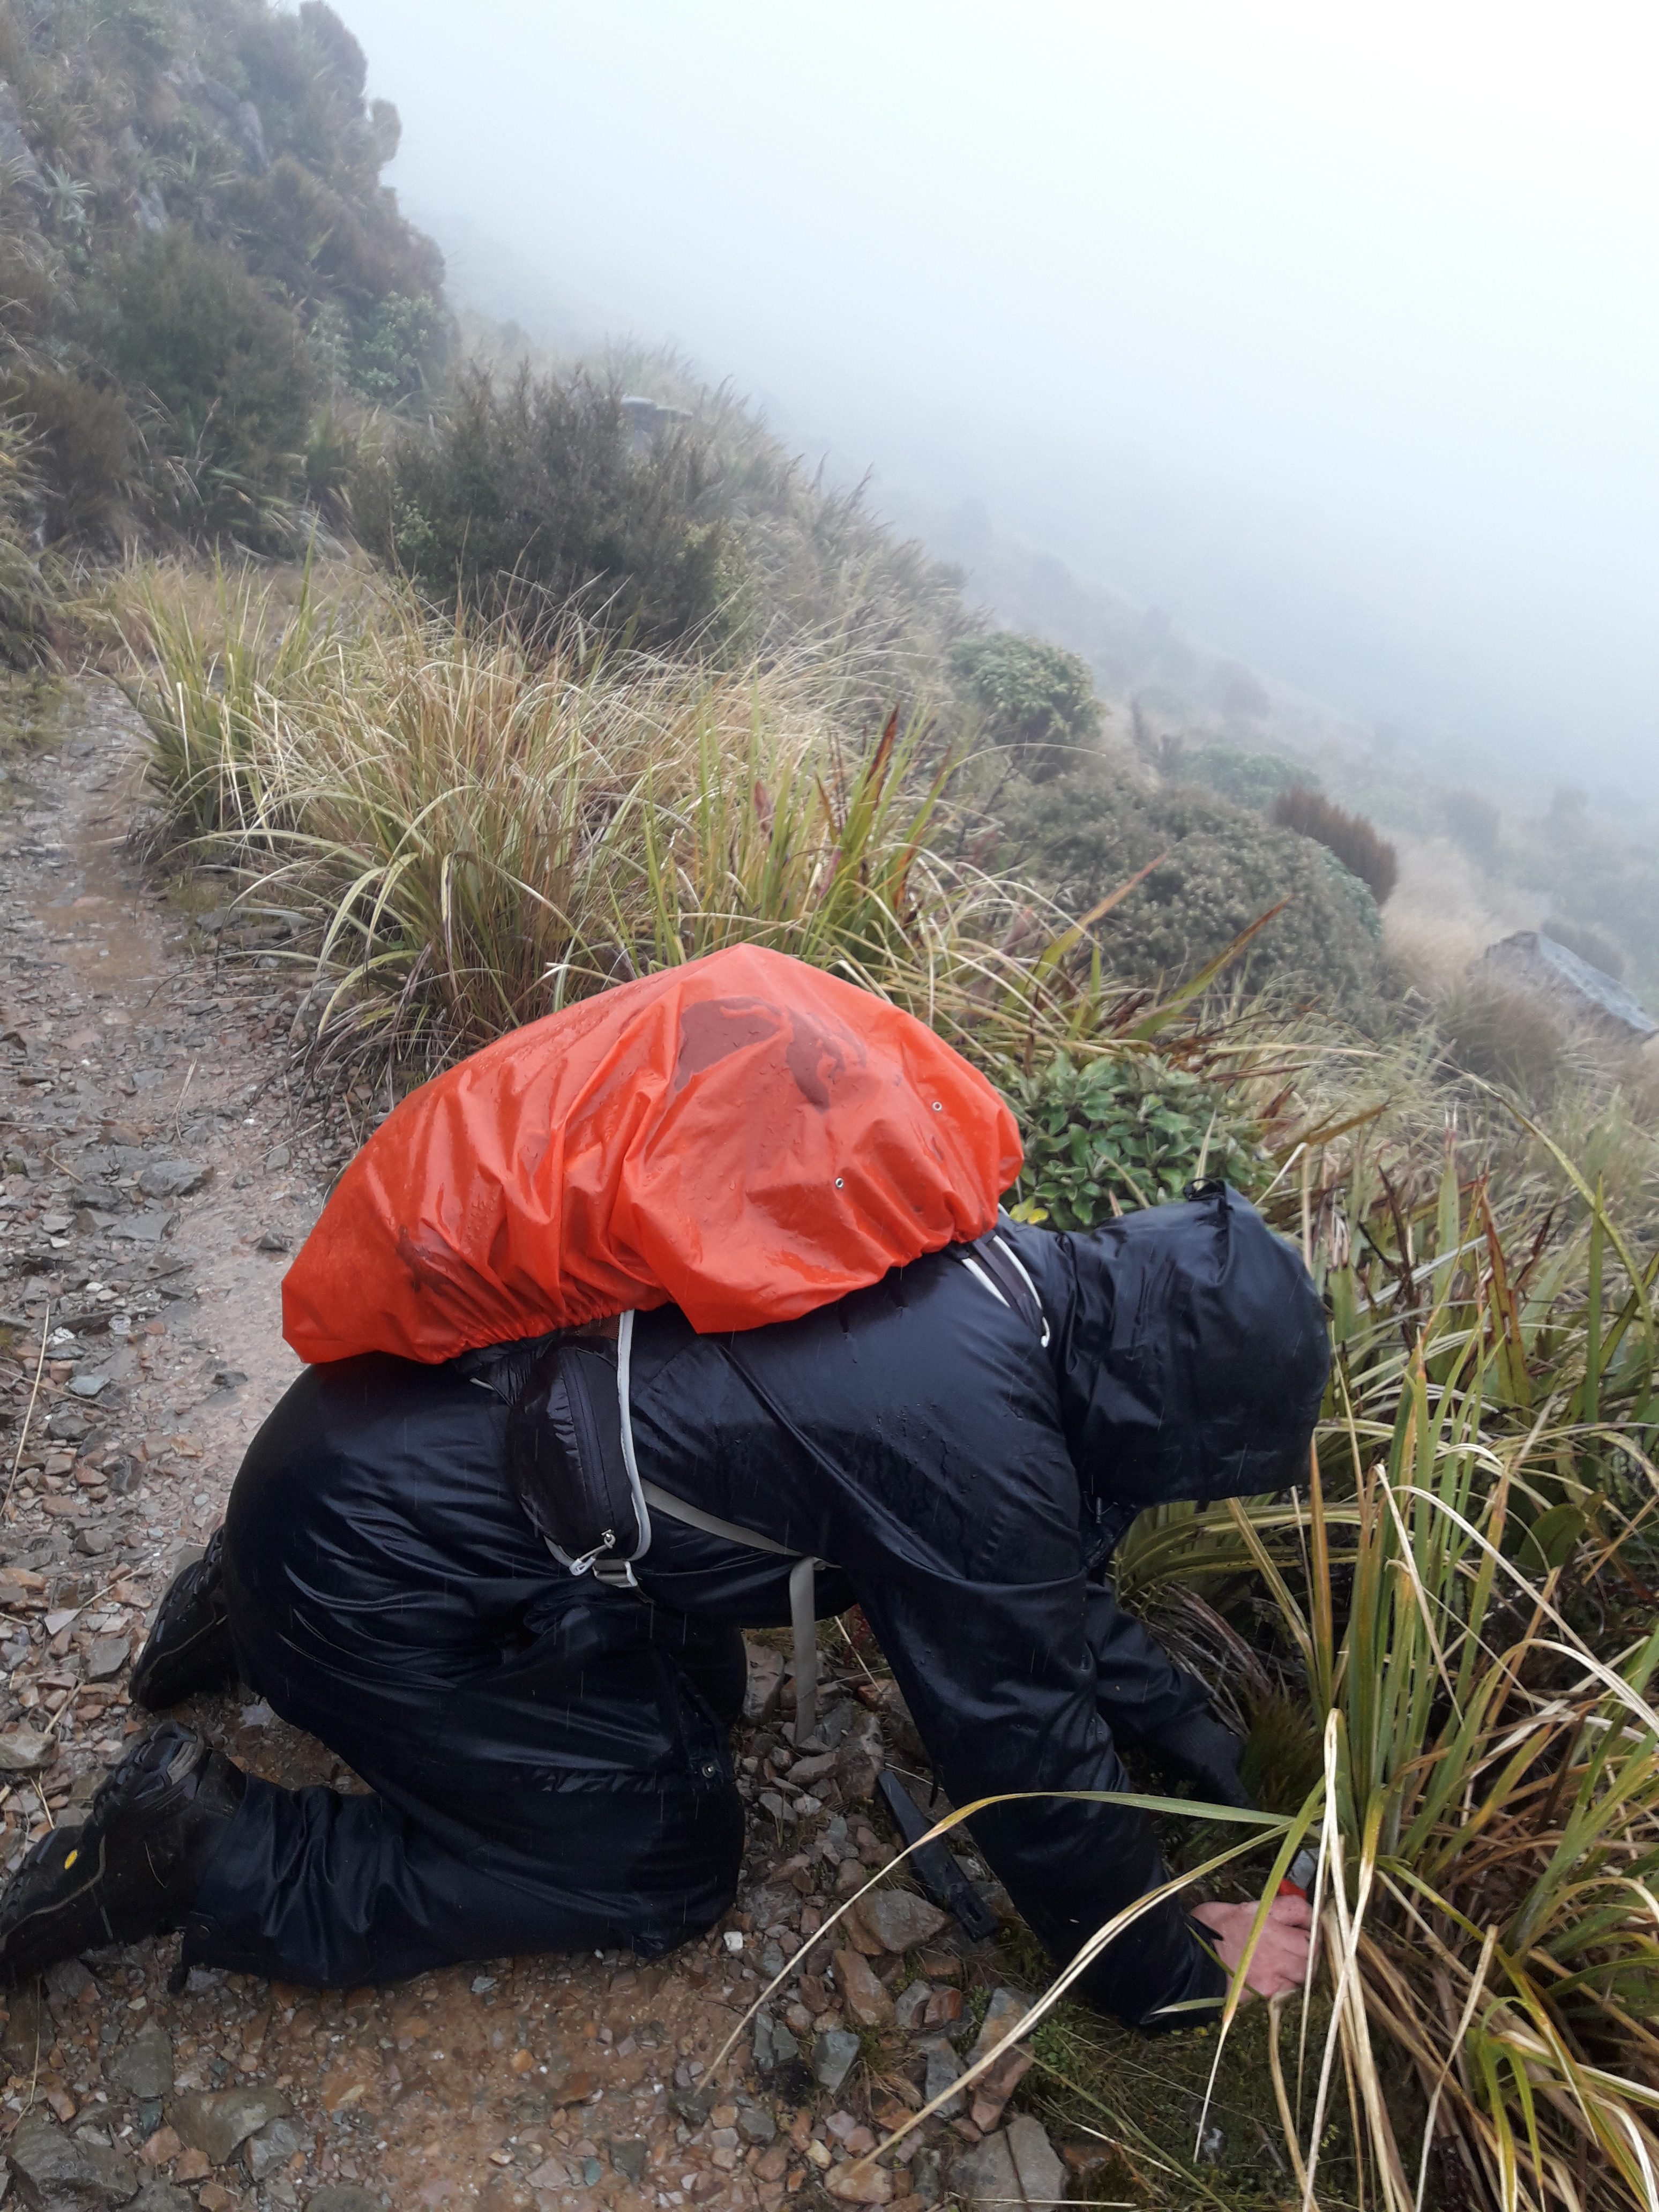 A man in wet-weather gear is kneeling on a stony path looking at long grasses.